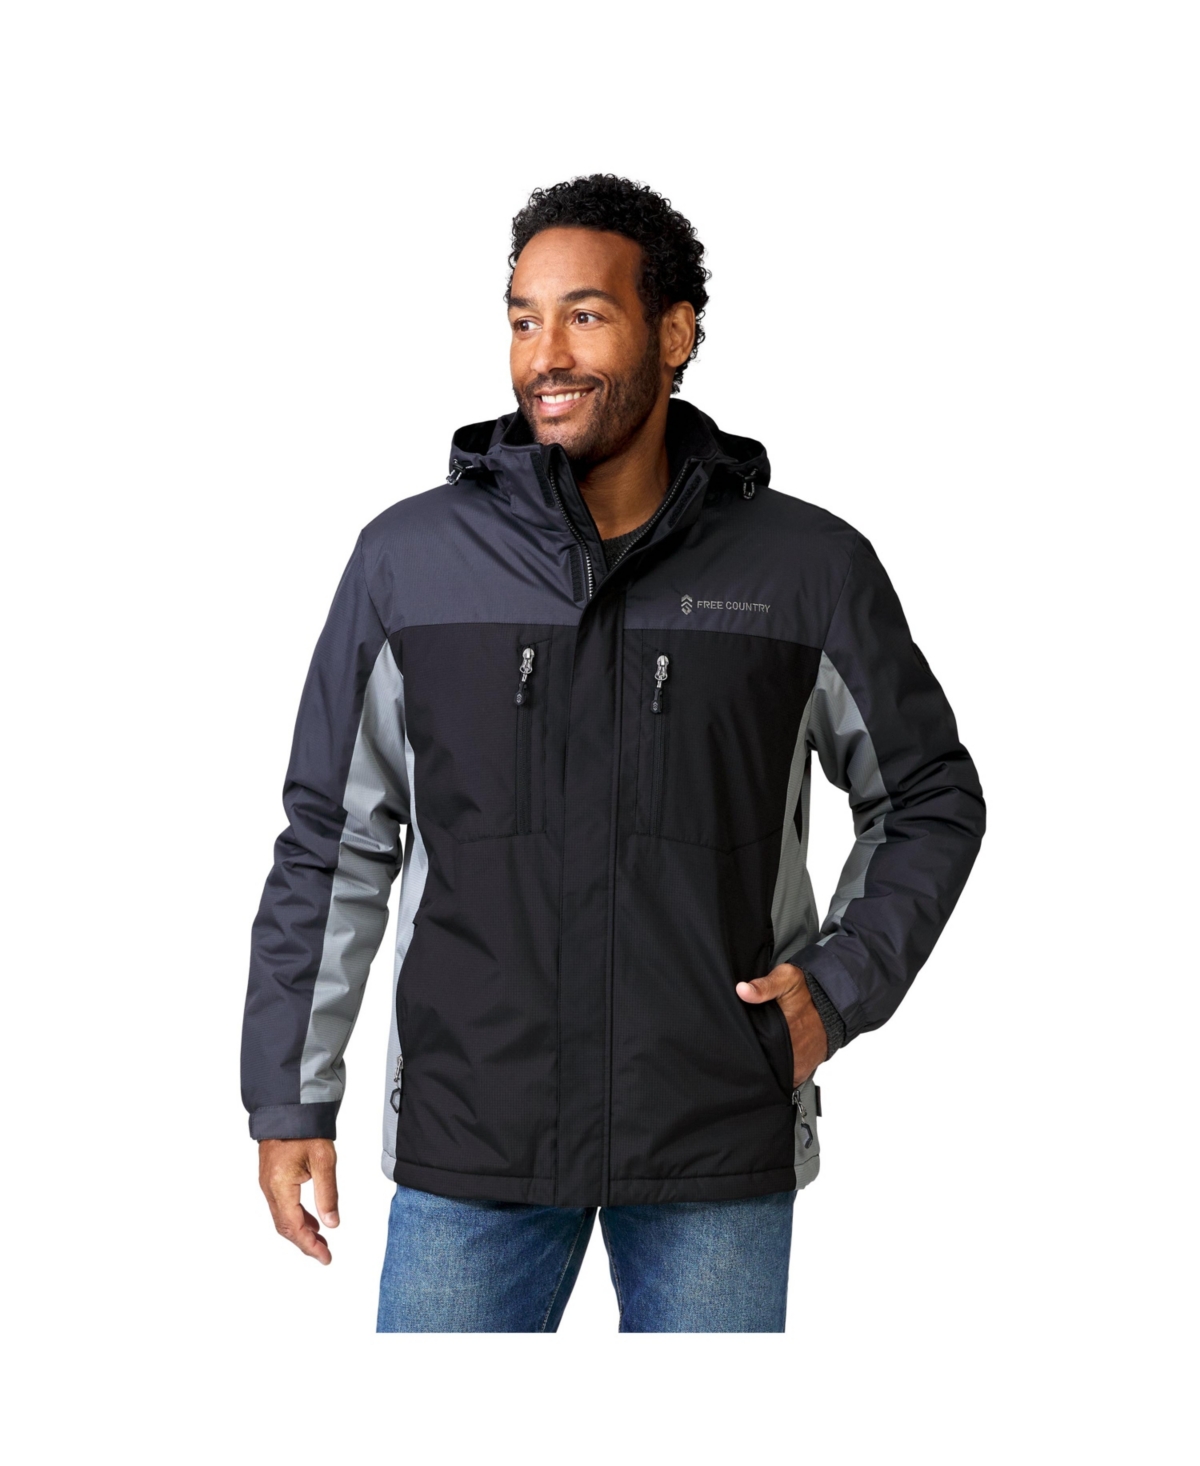 Men's FreeCycle Trifecta Mid Weight Jacket - Black/charcoal